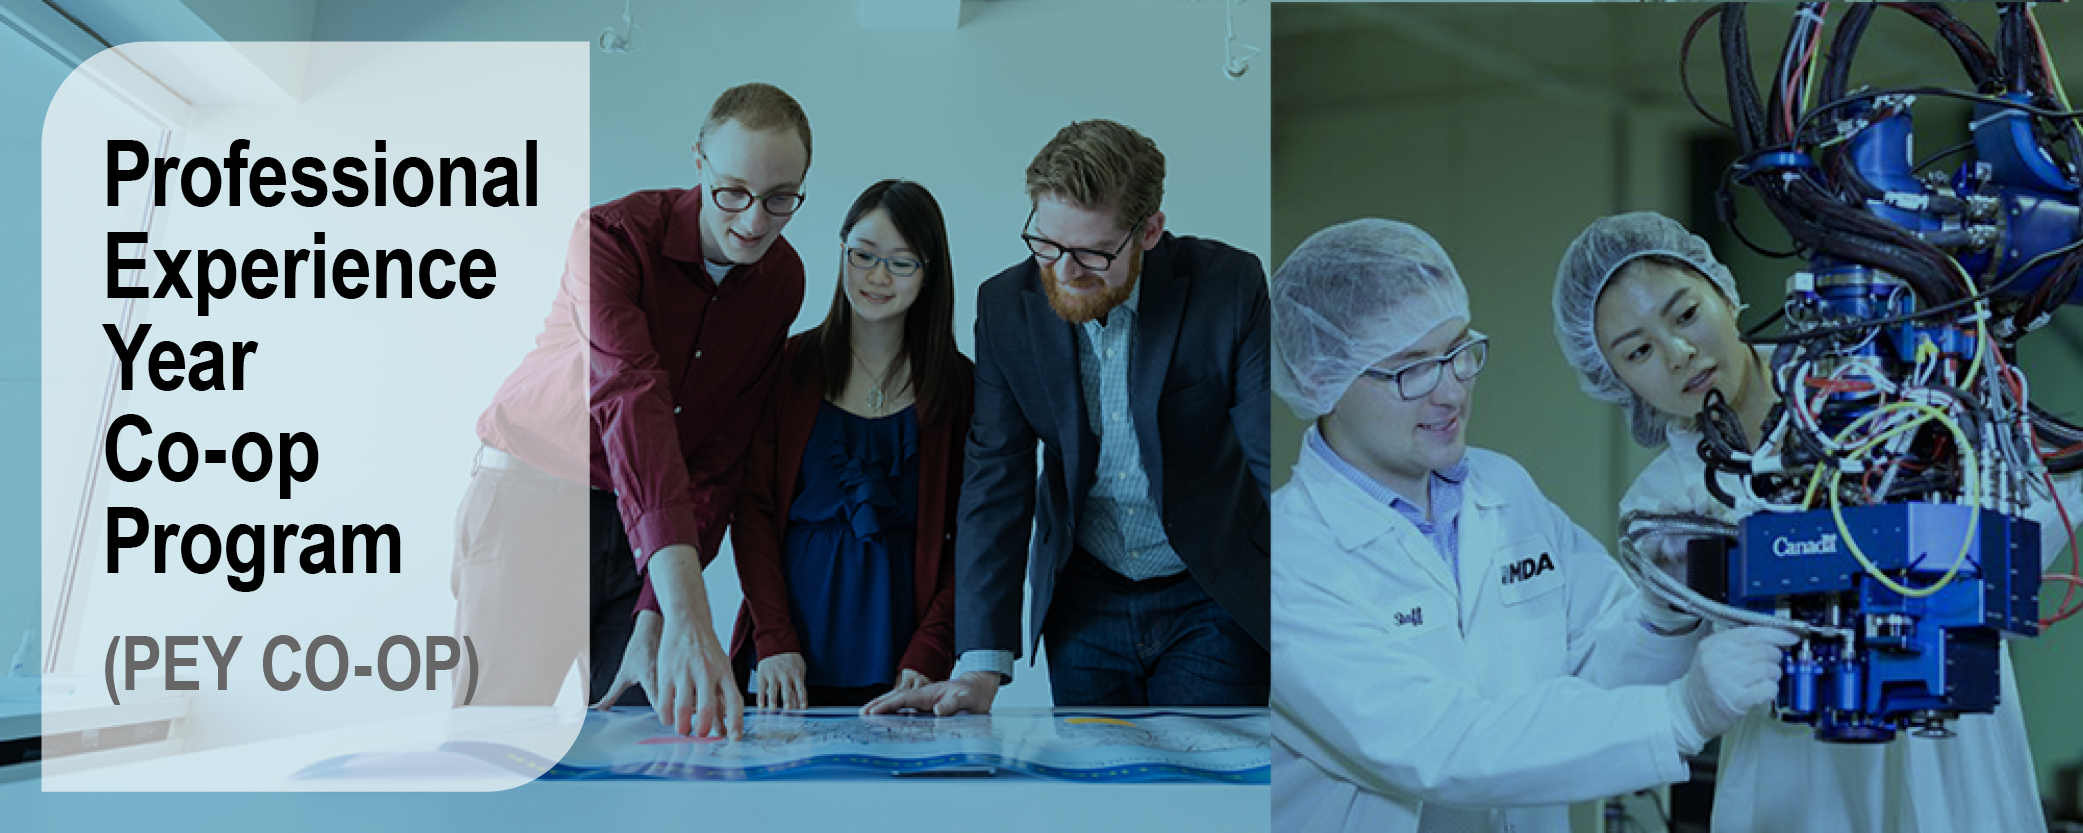 Two images positioned beside each other as a horizontal banner. The first image shows three workers pointing at a map. The second image shows two individuals wearing lab coats and working in an engineering lab. Text reads: Professional Experience Year Co-op Program (PEY CO-OP)